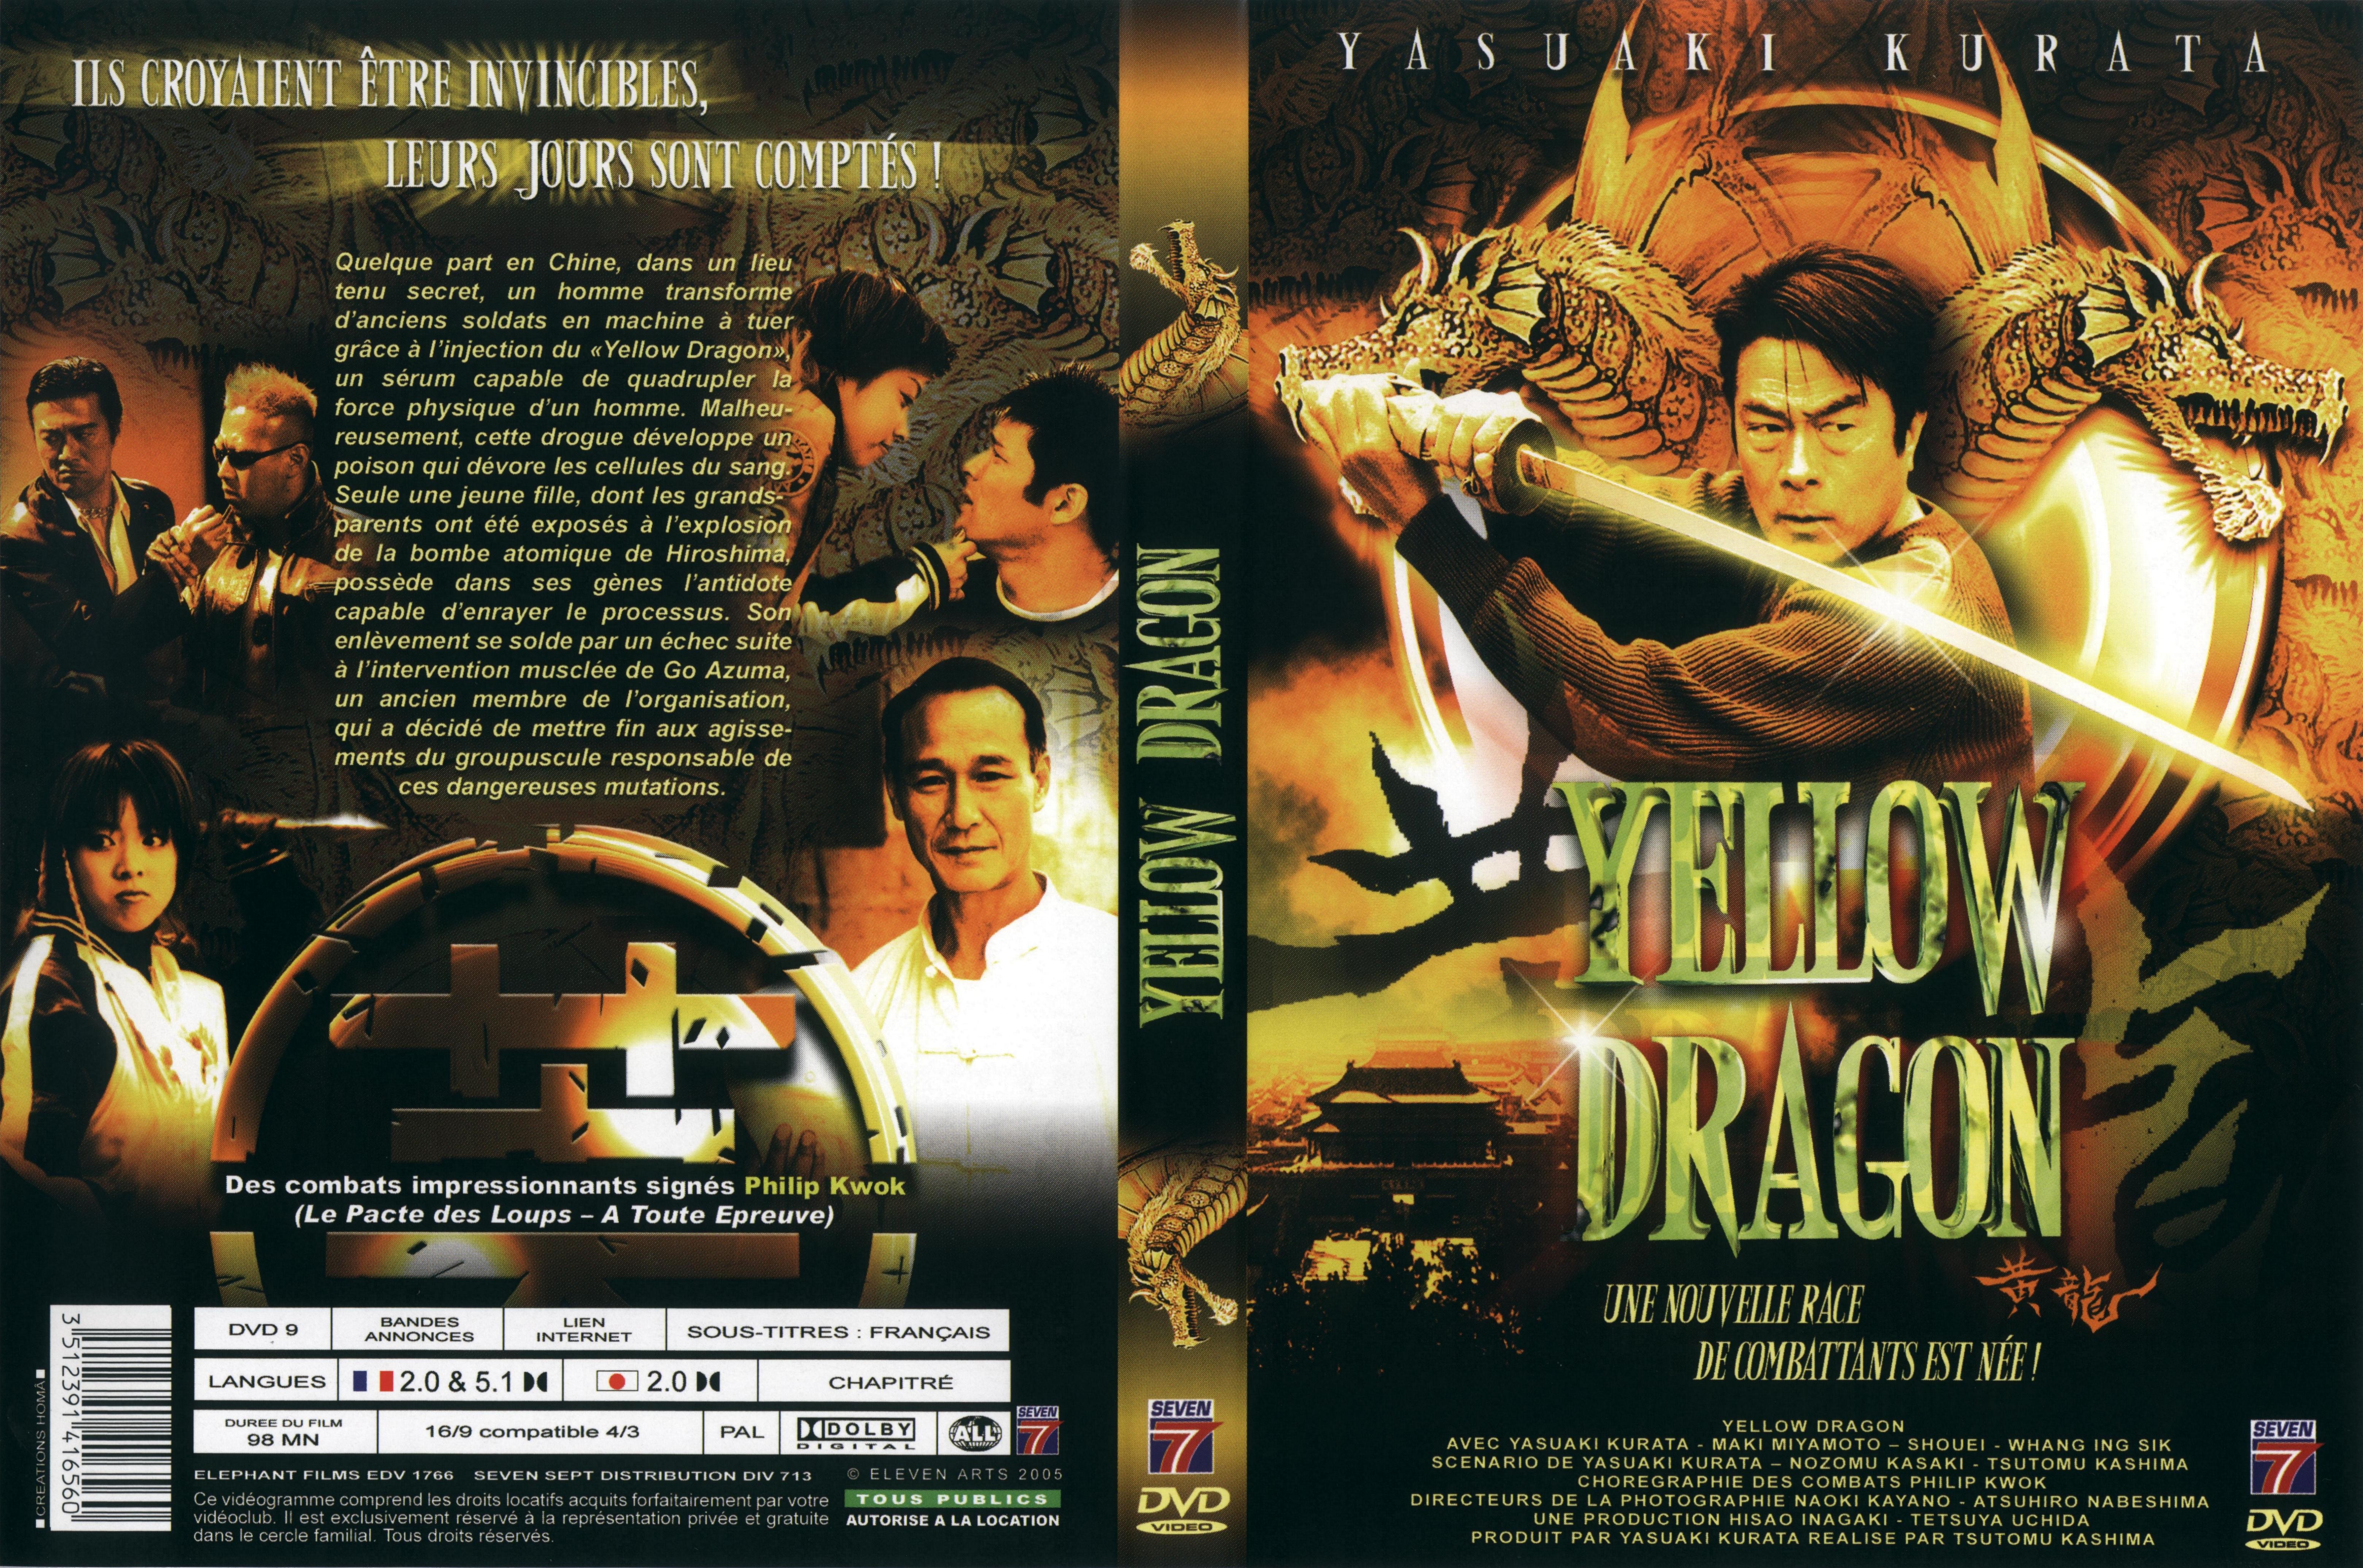 Jaquette DVD Yellow dragon